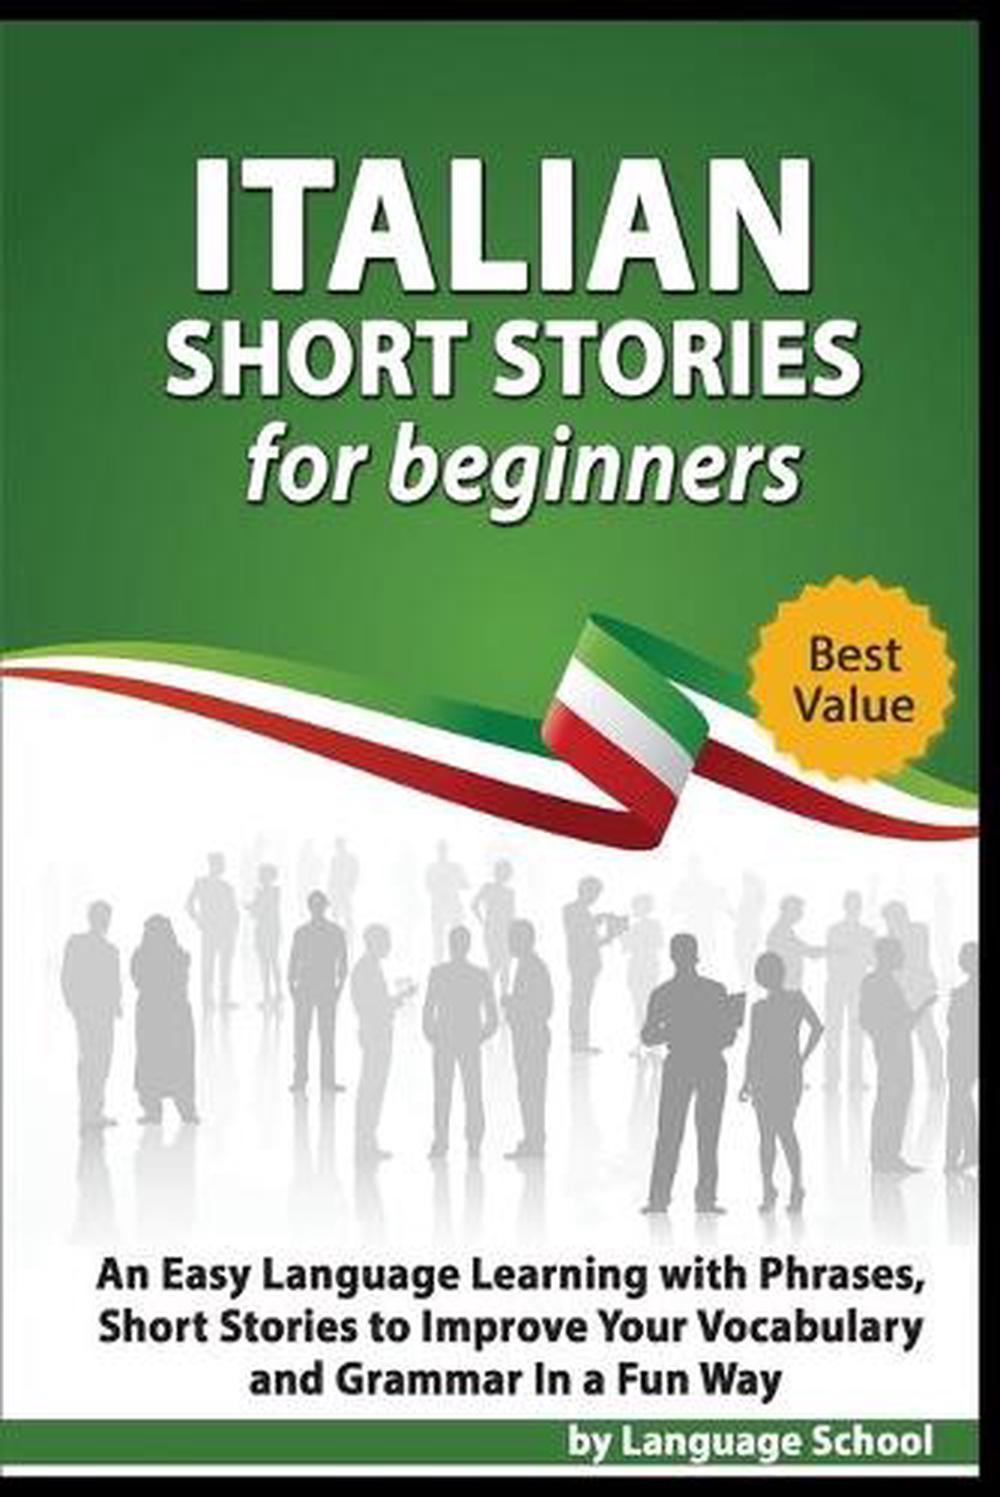 Italian Short Stories for Beginners by Language School Free Shipping ...